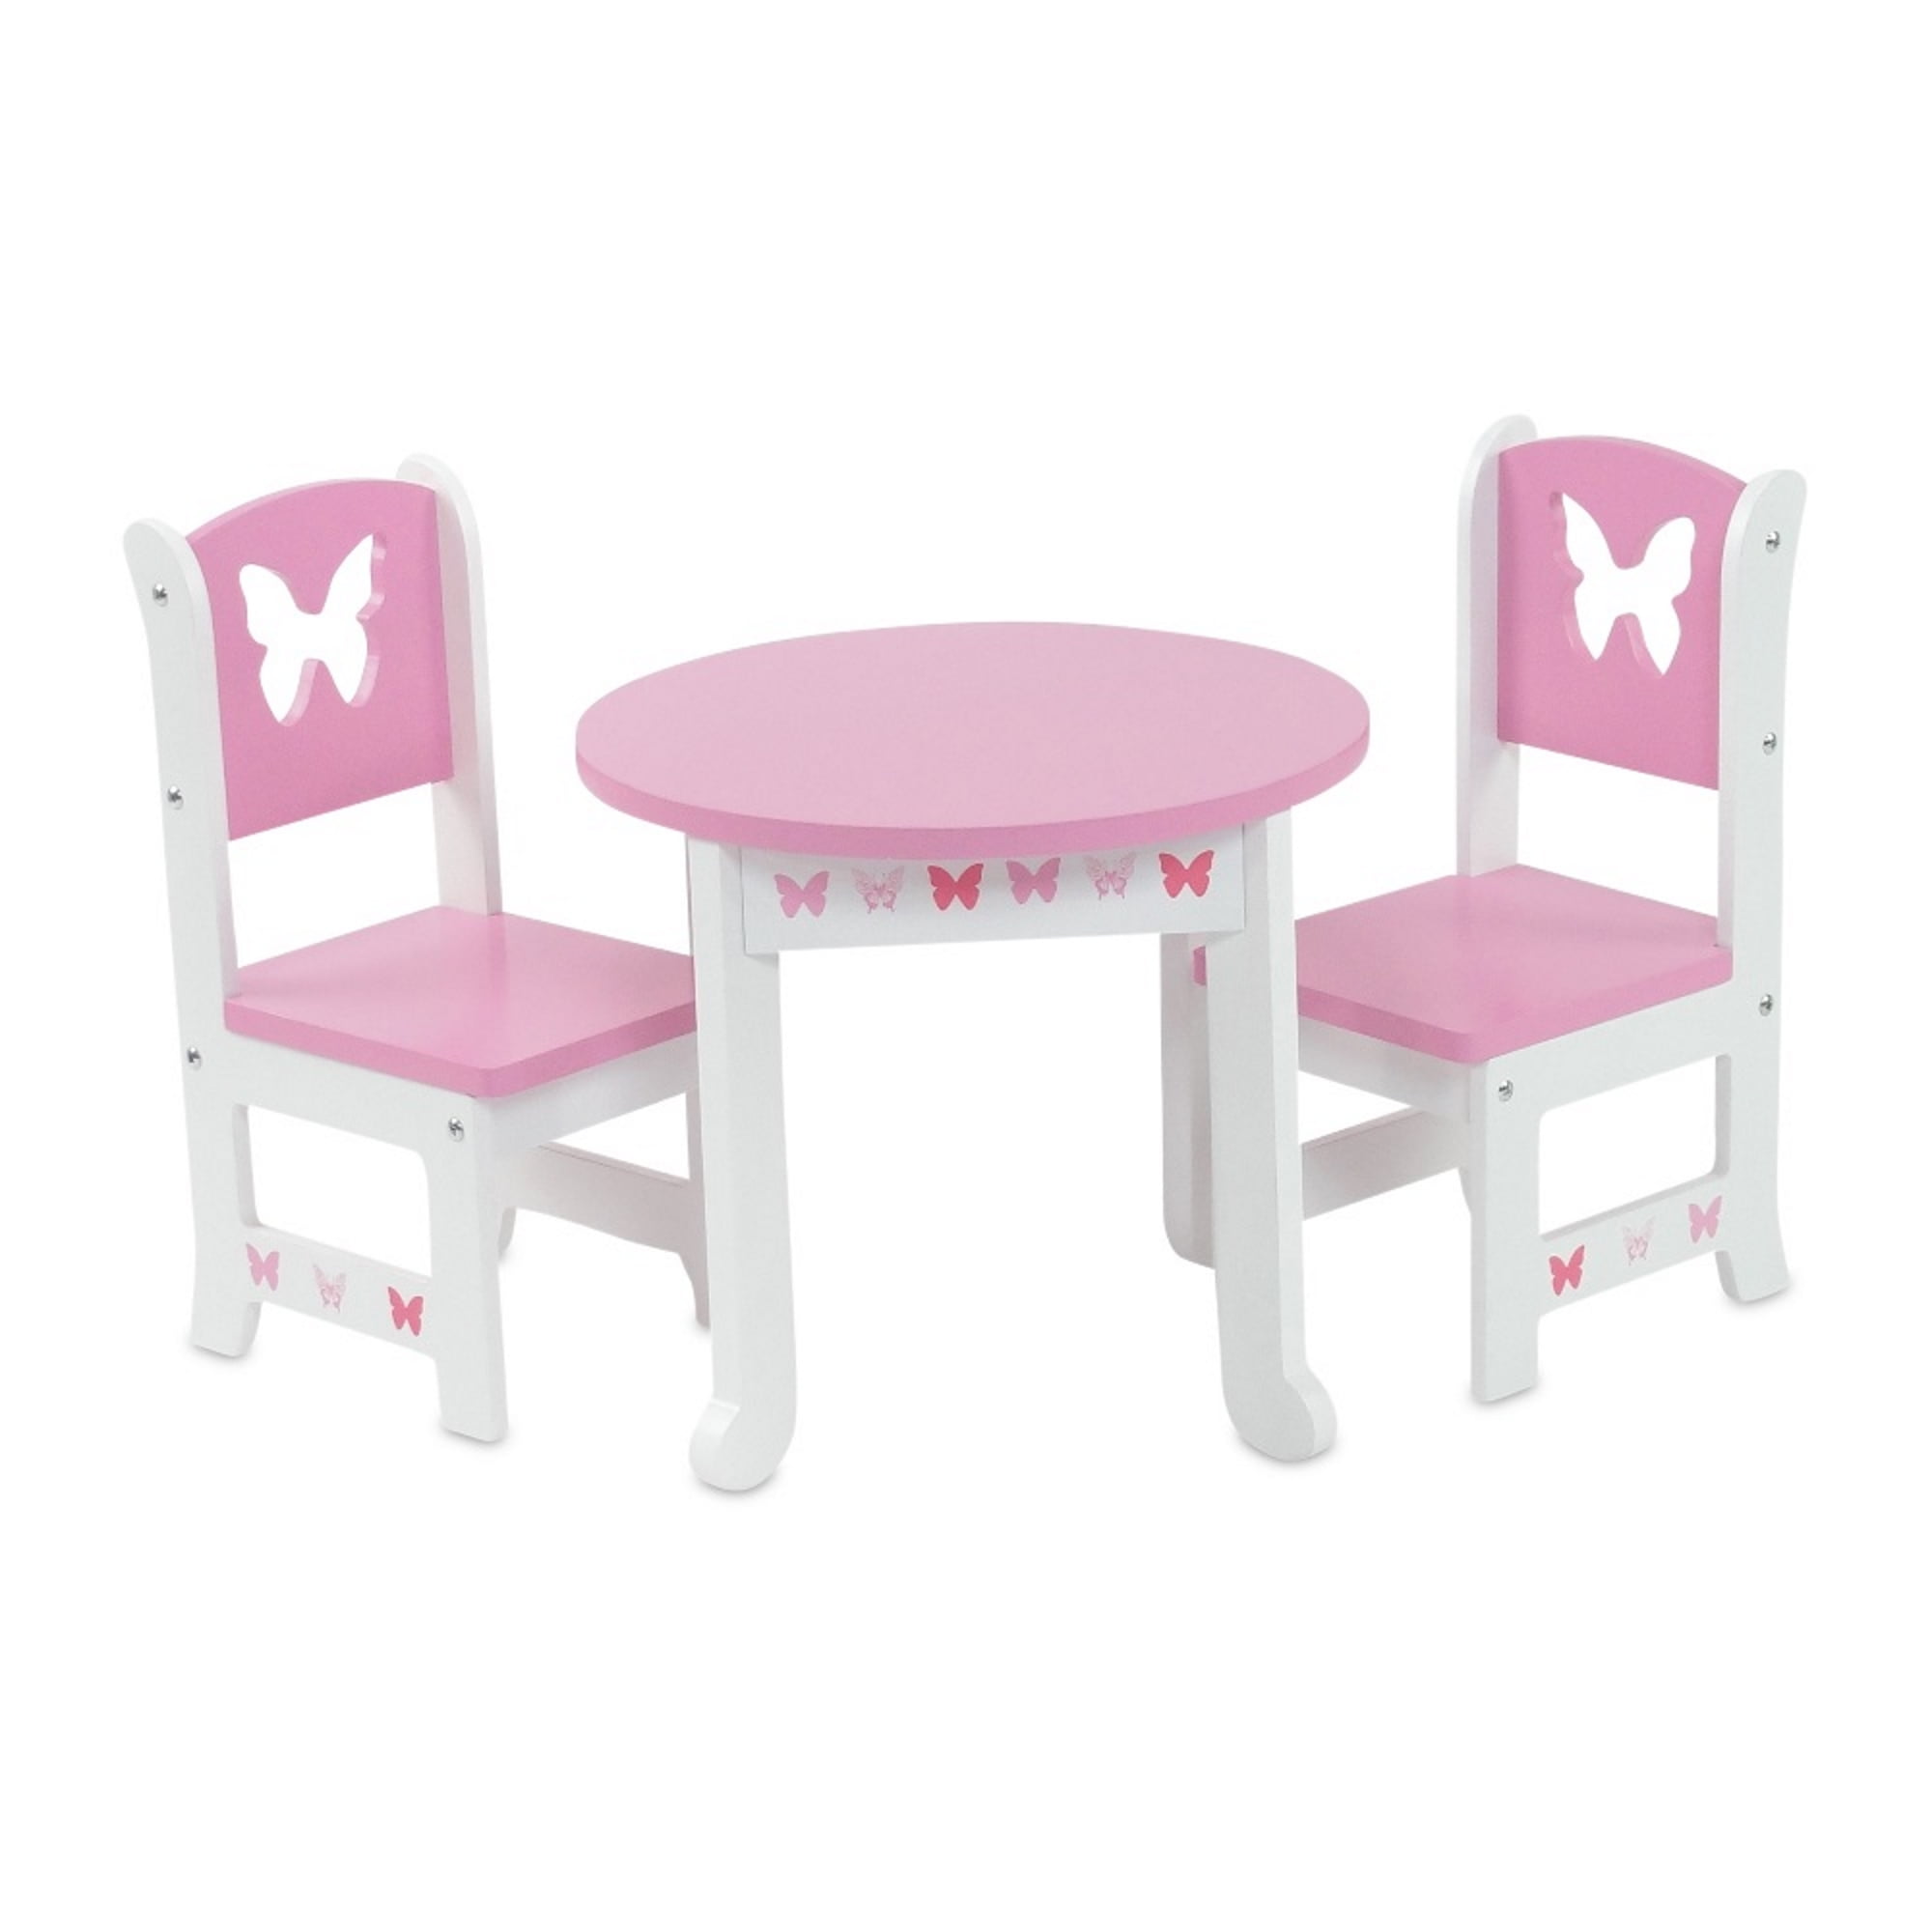 18" Doll Kitchen CAFE TABLE & TWO CHAIRS Fits American Girl Furniture Accessory 